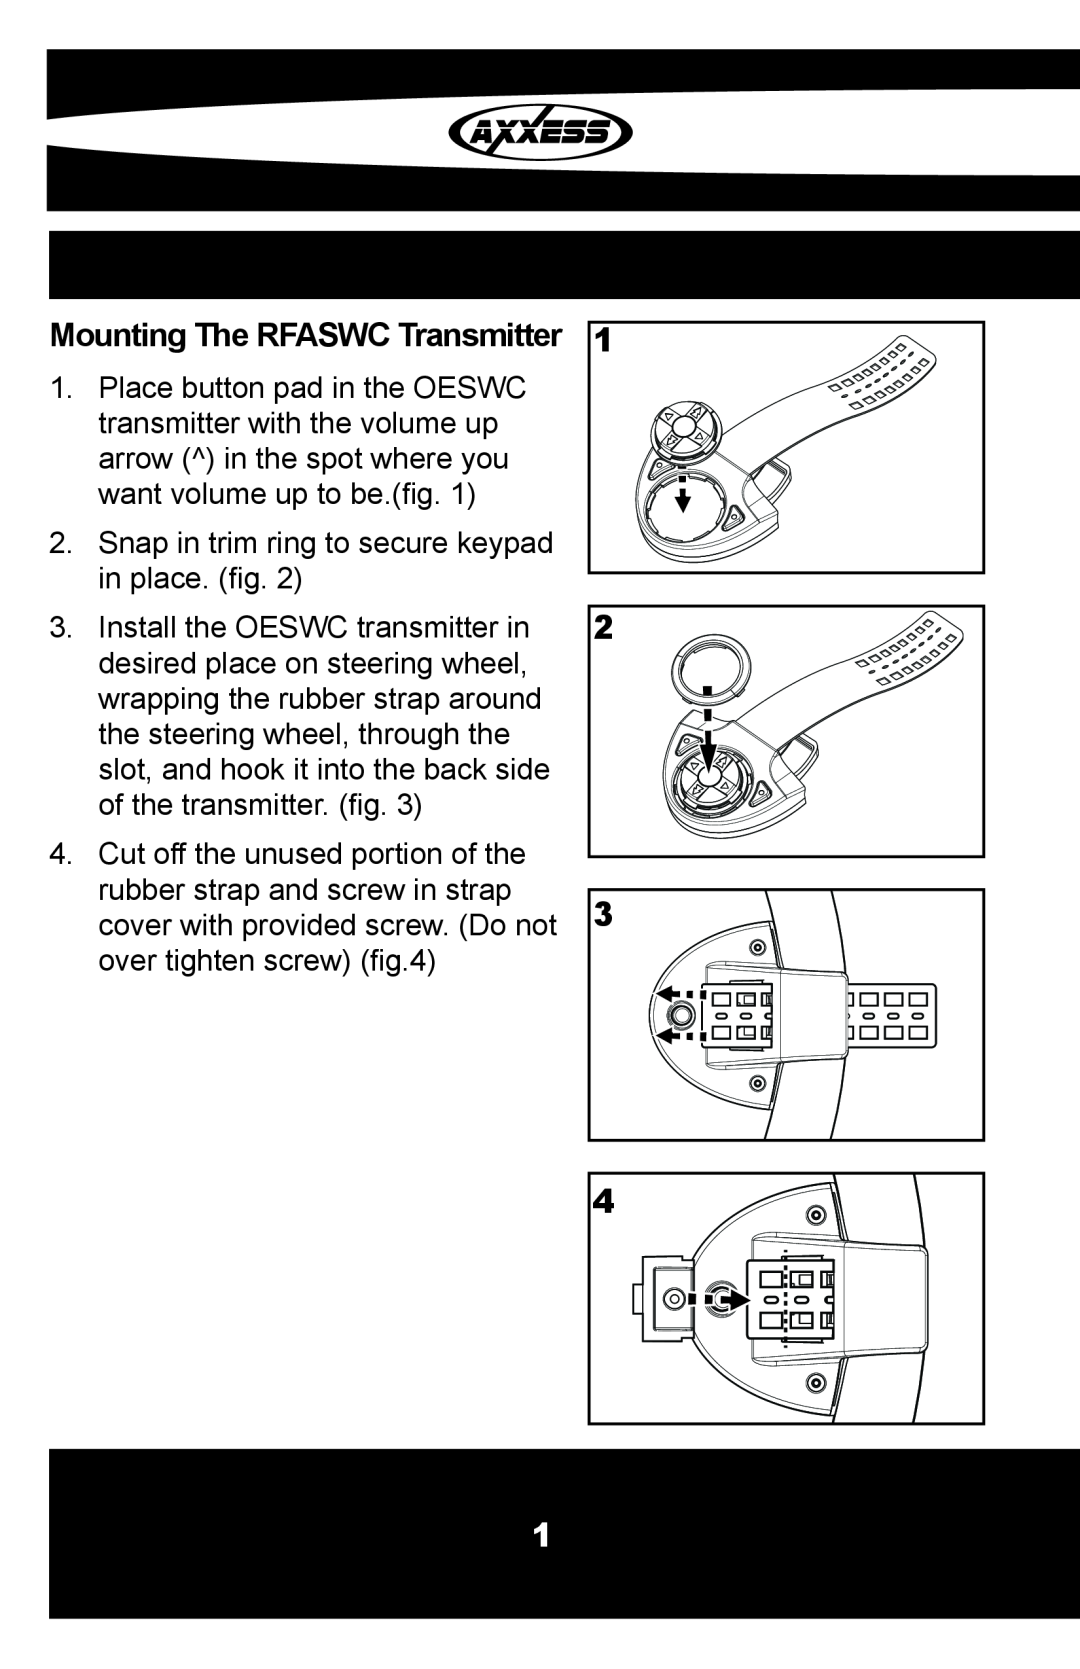 Axxess Interface OESWC-7552-RF installation instructions 1 2 3 4, Mounting The RFASWC Transmitter 